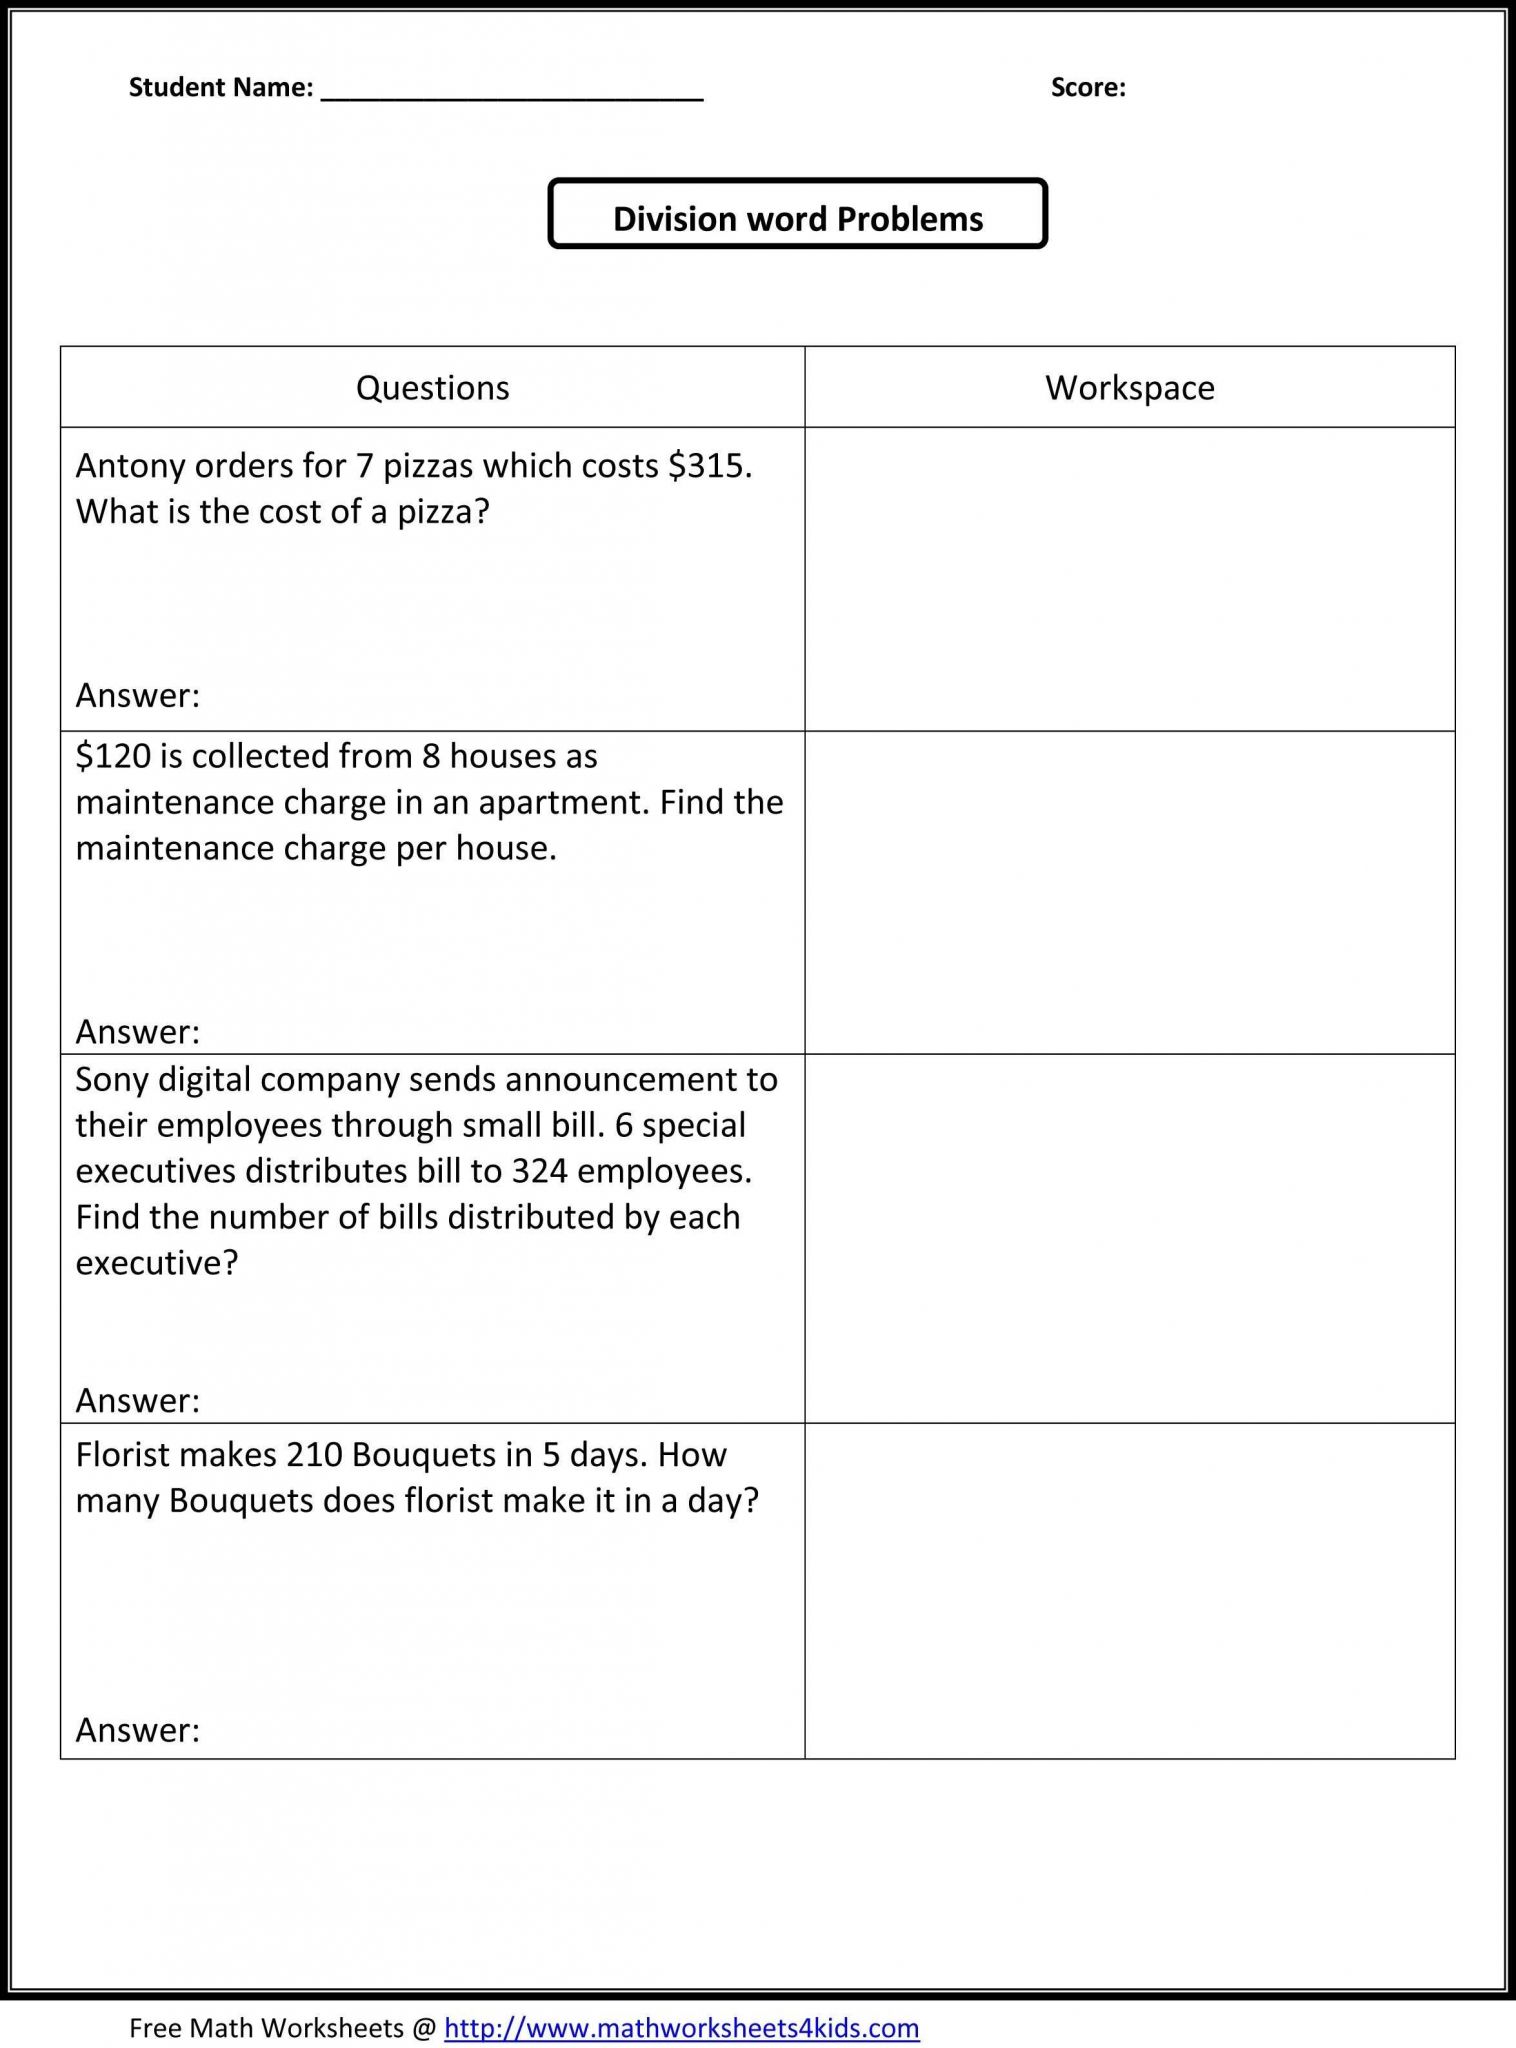 Square Root Worksheets 8th Grade Pdf together with Quadratic Word Problems Worksheet and Answers Inspirationa 4th Grade